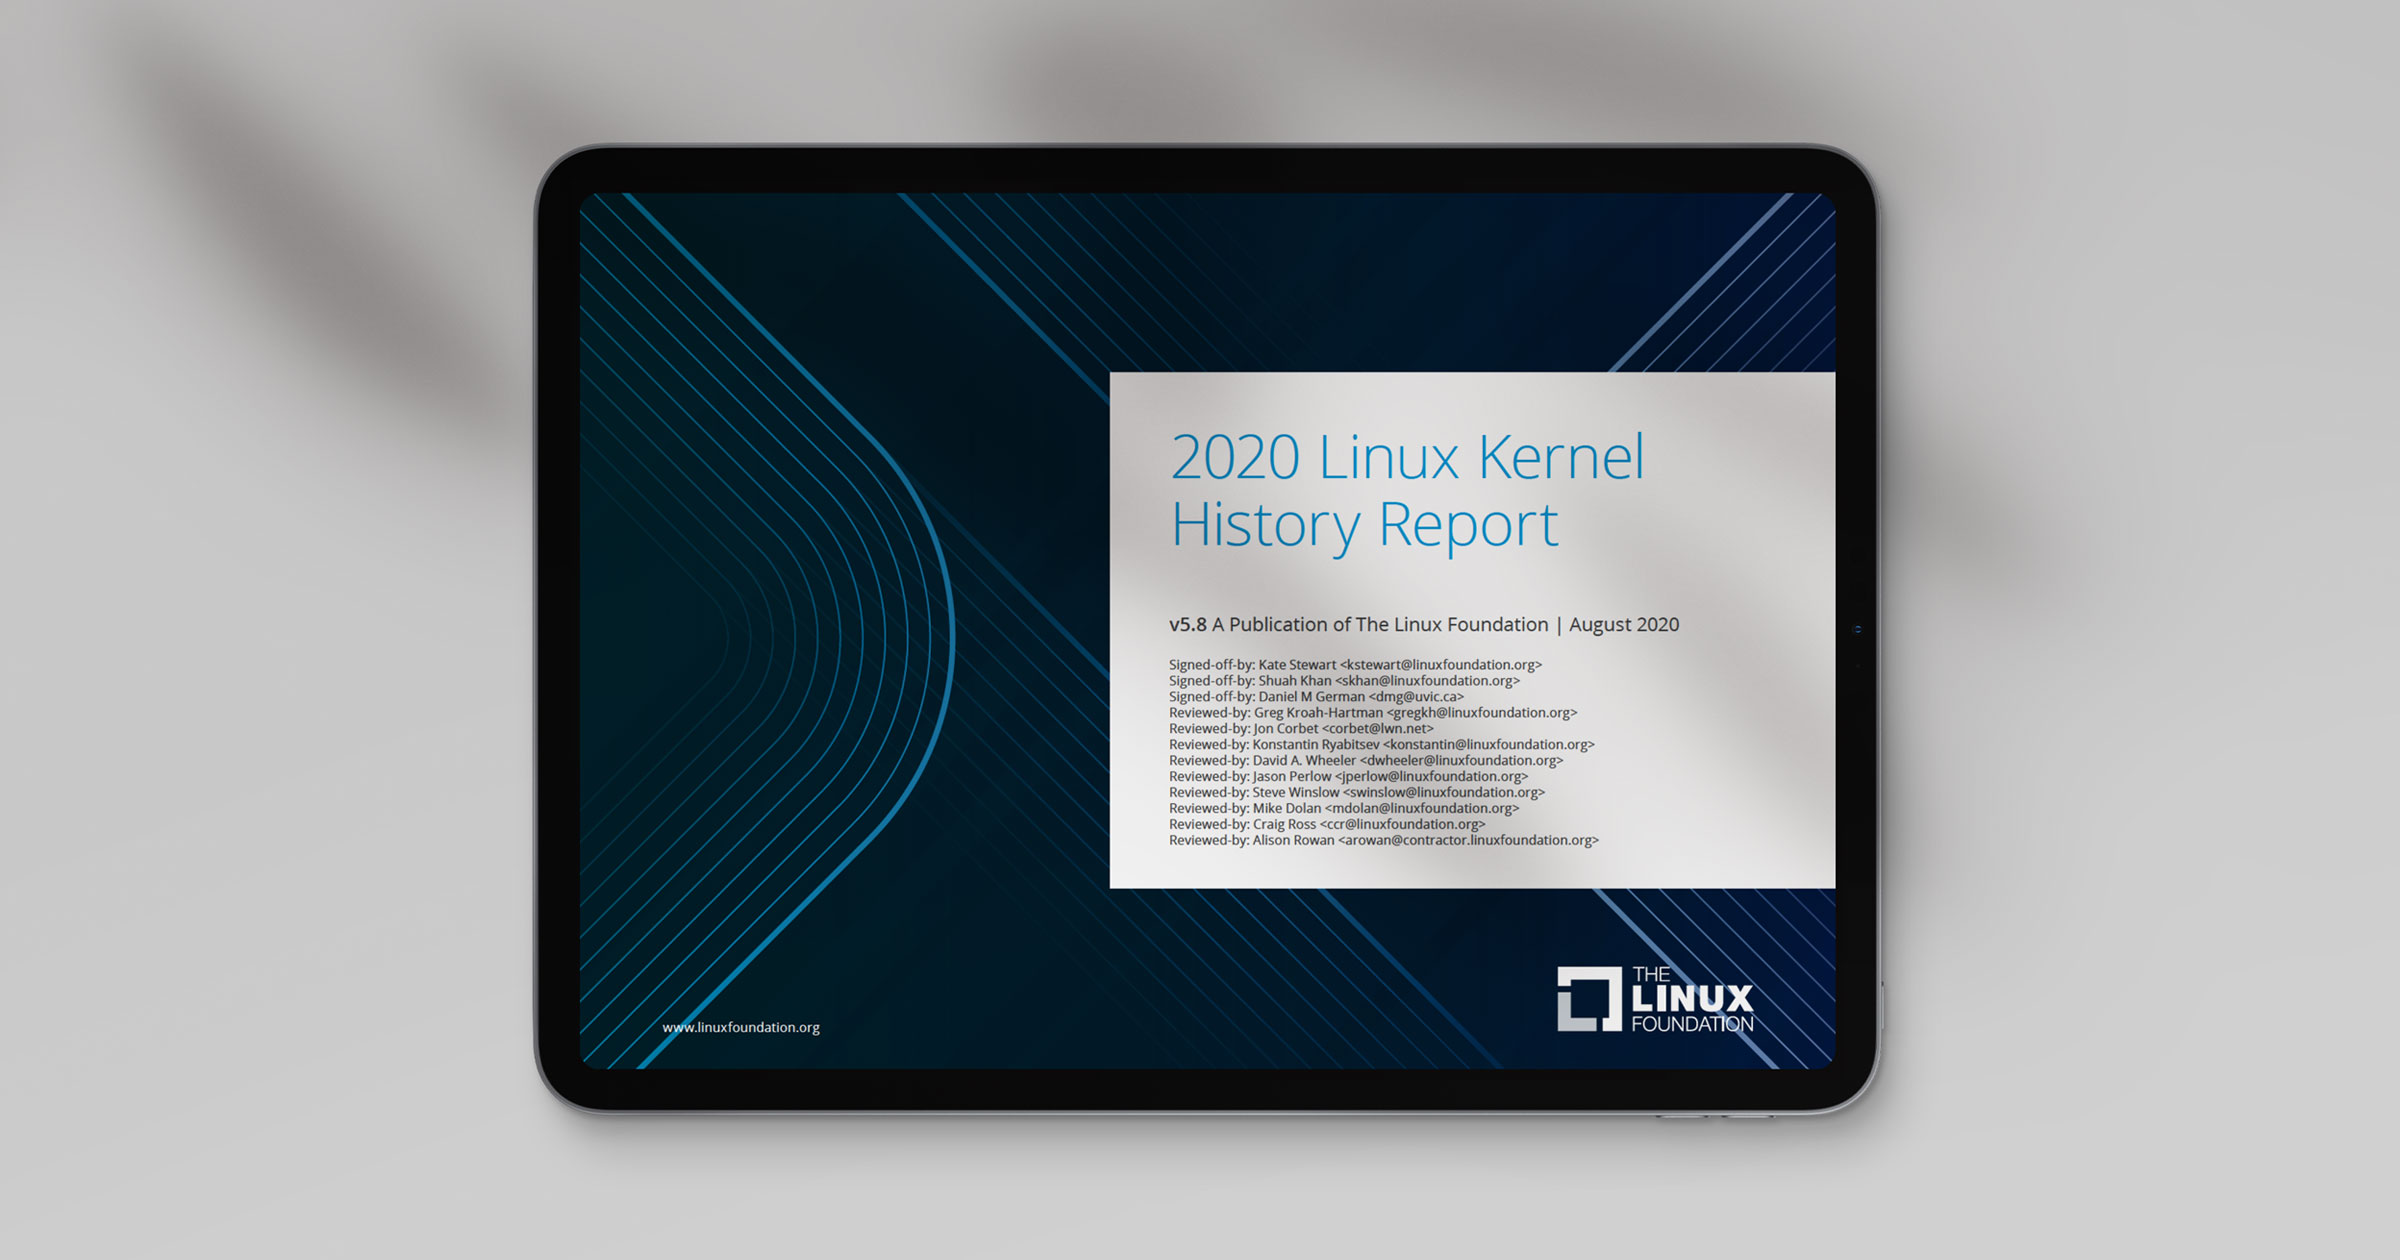 Linux Kernel History Report 2020 Featured Image 2